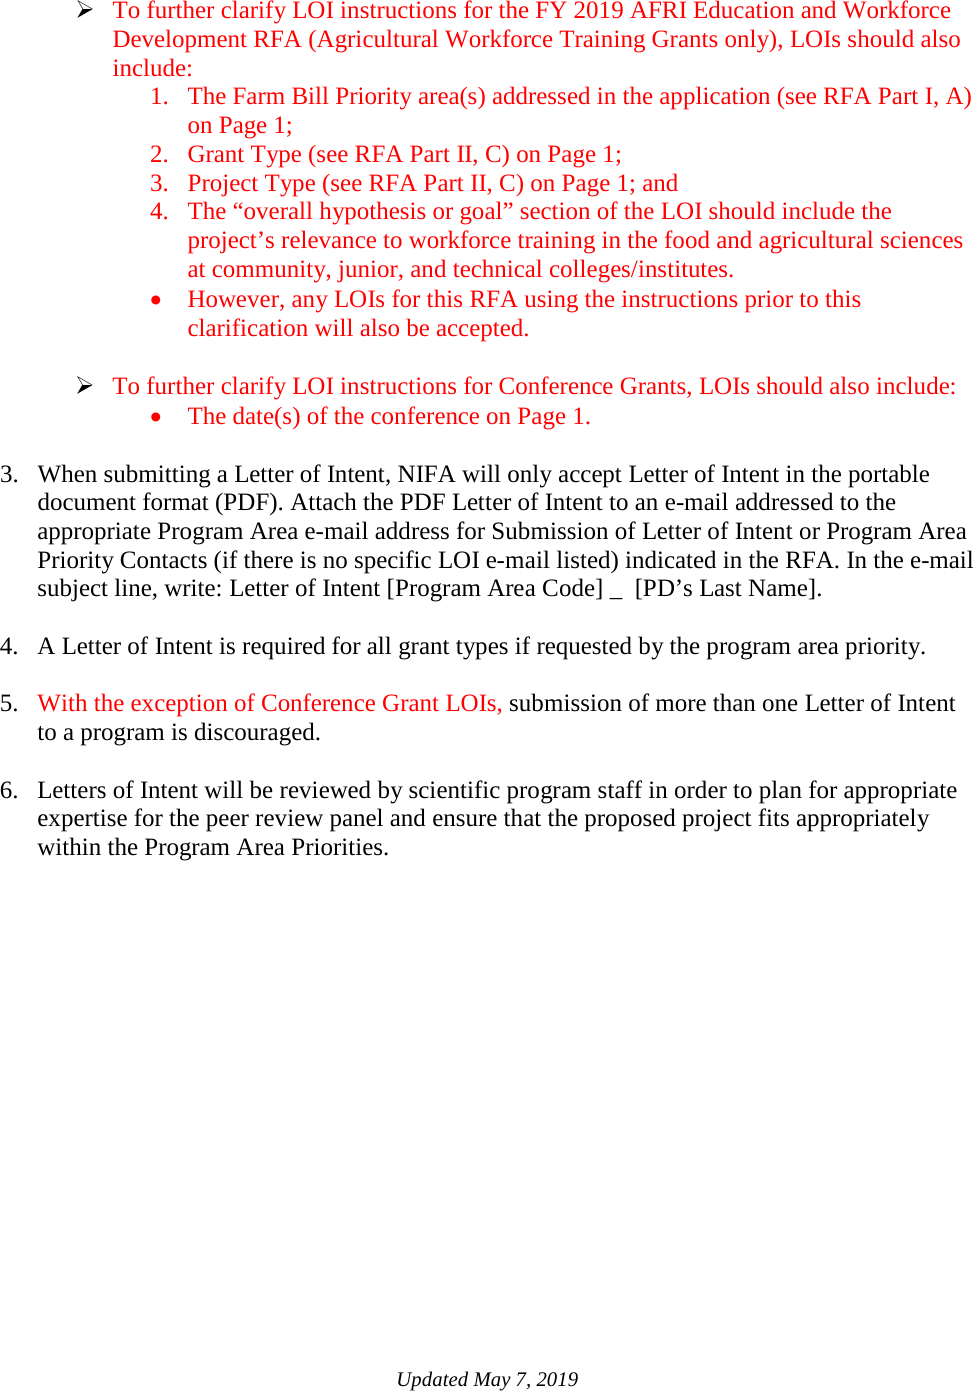 Page 2 of 2 - AFRI Letter Of Intent Instructions AFRI-Letter-of-Intent-Instructions